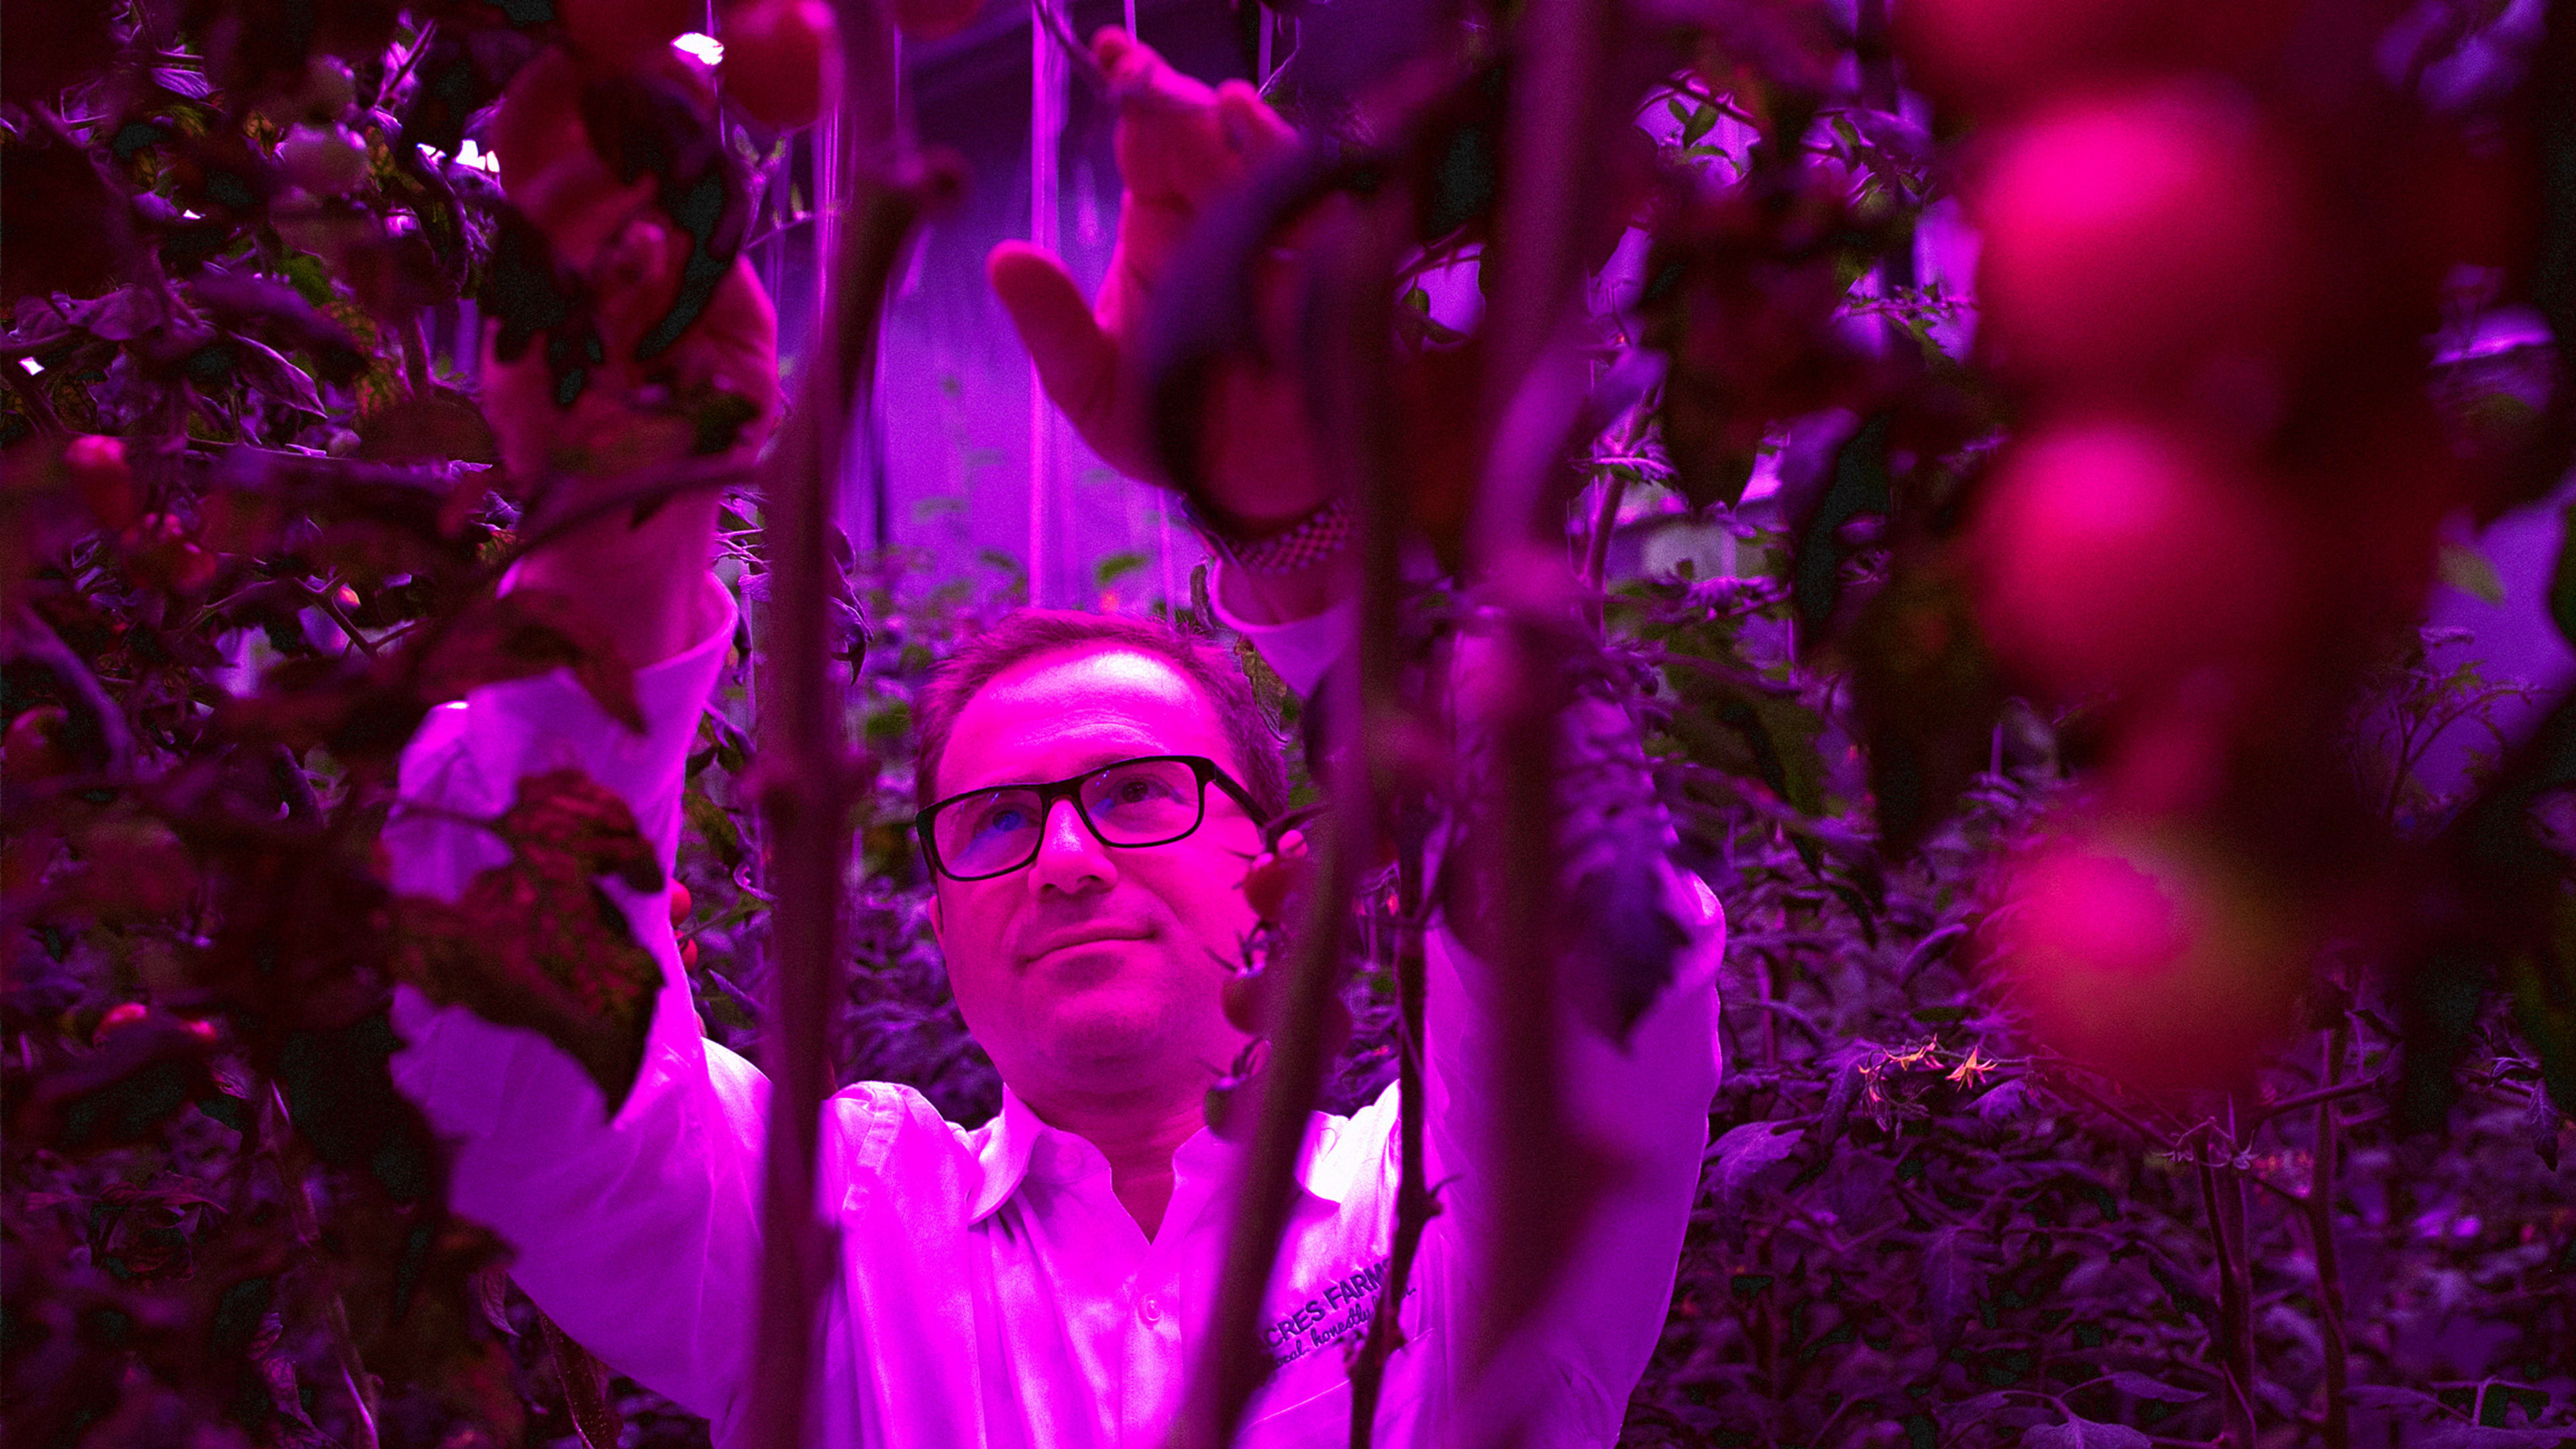 40% of U.S. produce is wasted. This vertical farming startup is fighting to change that